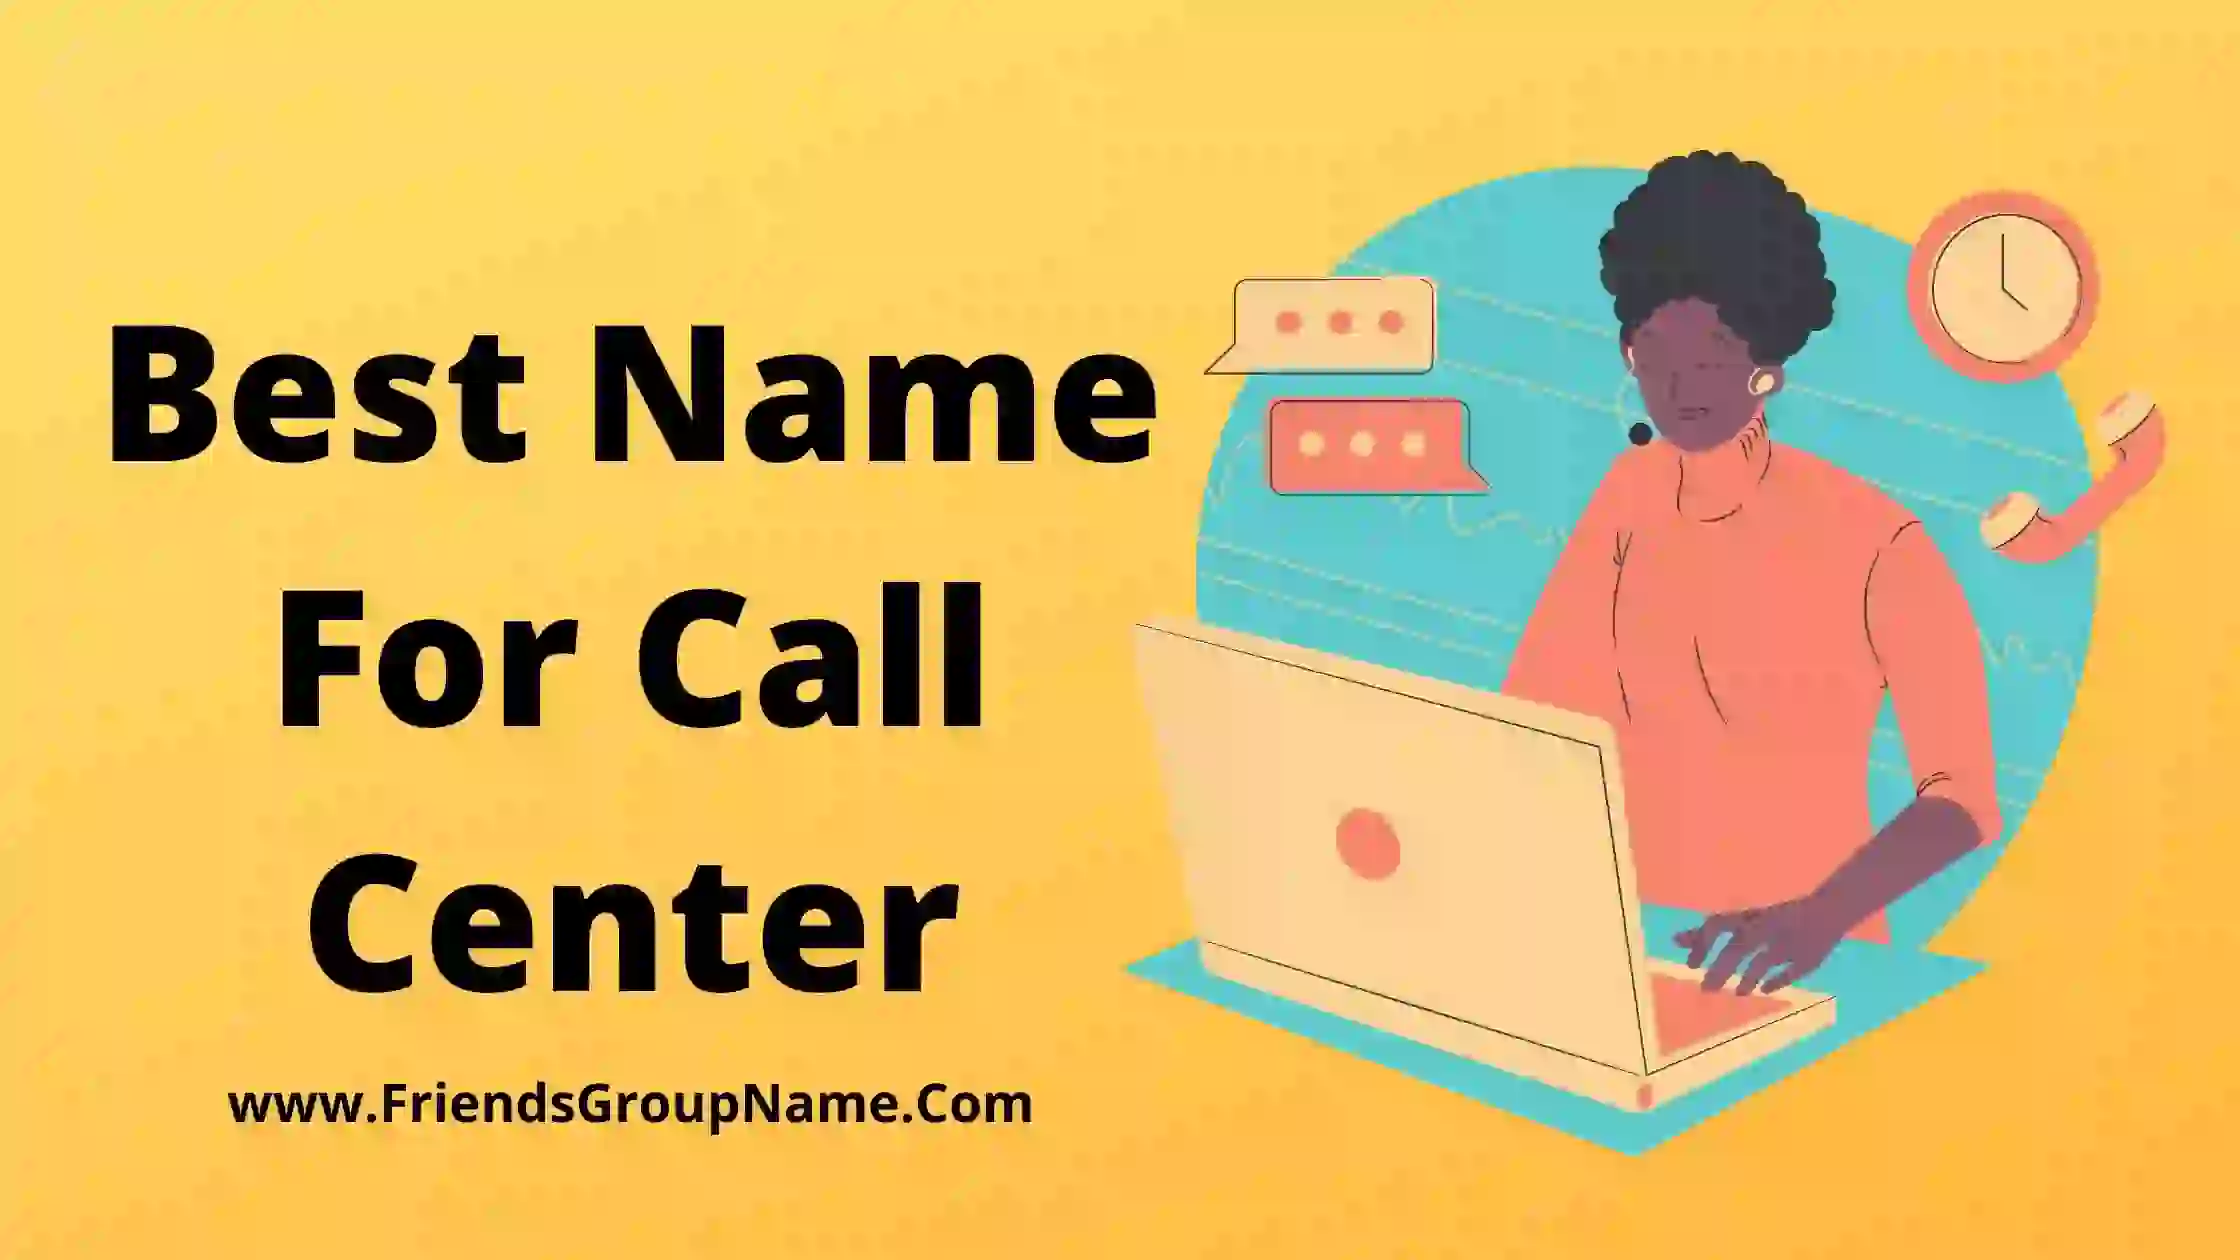 Best Name For Call Center